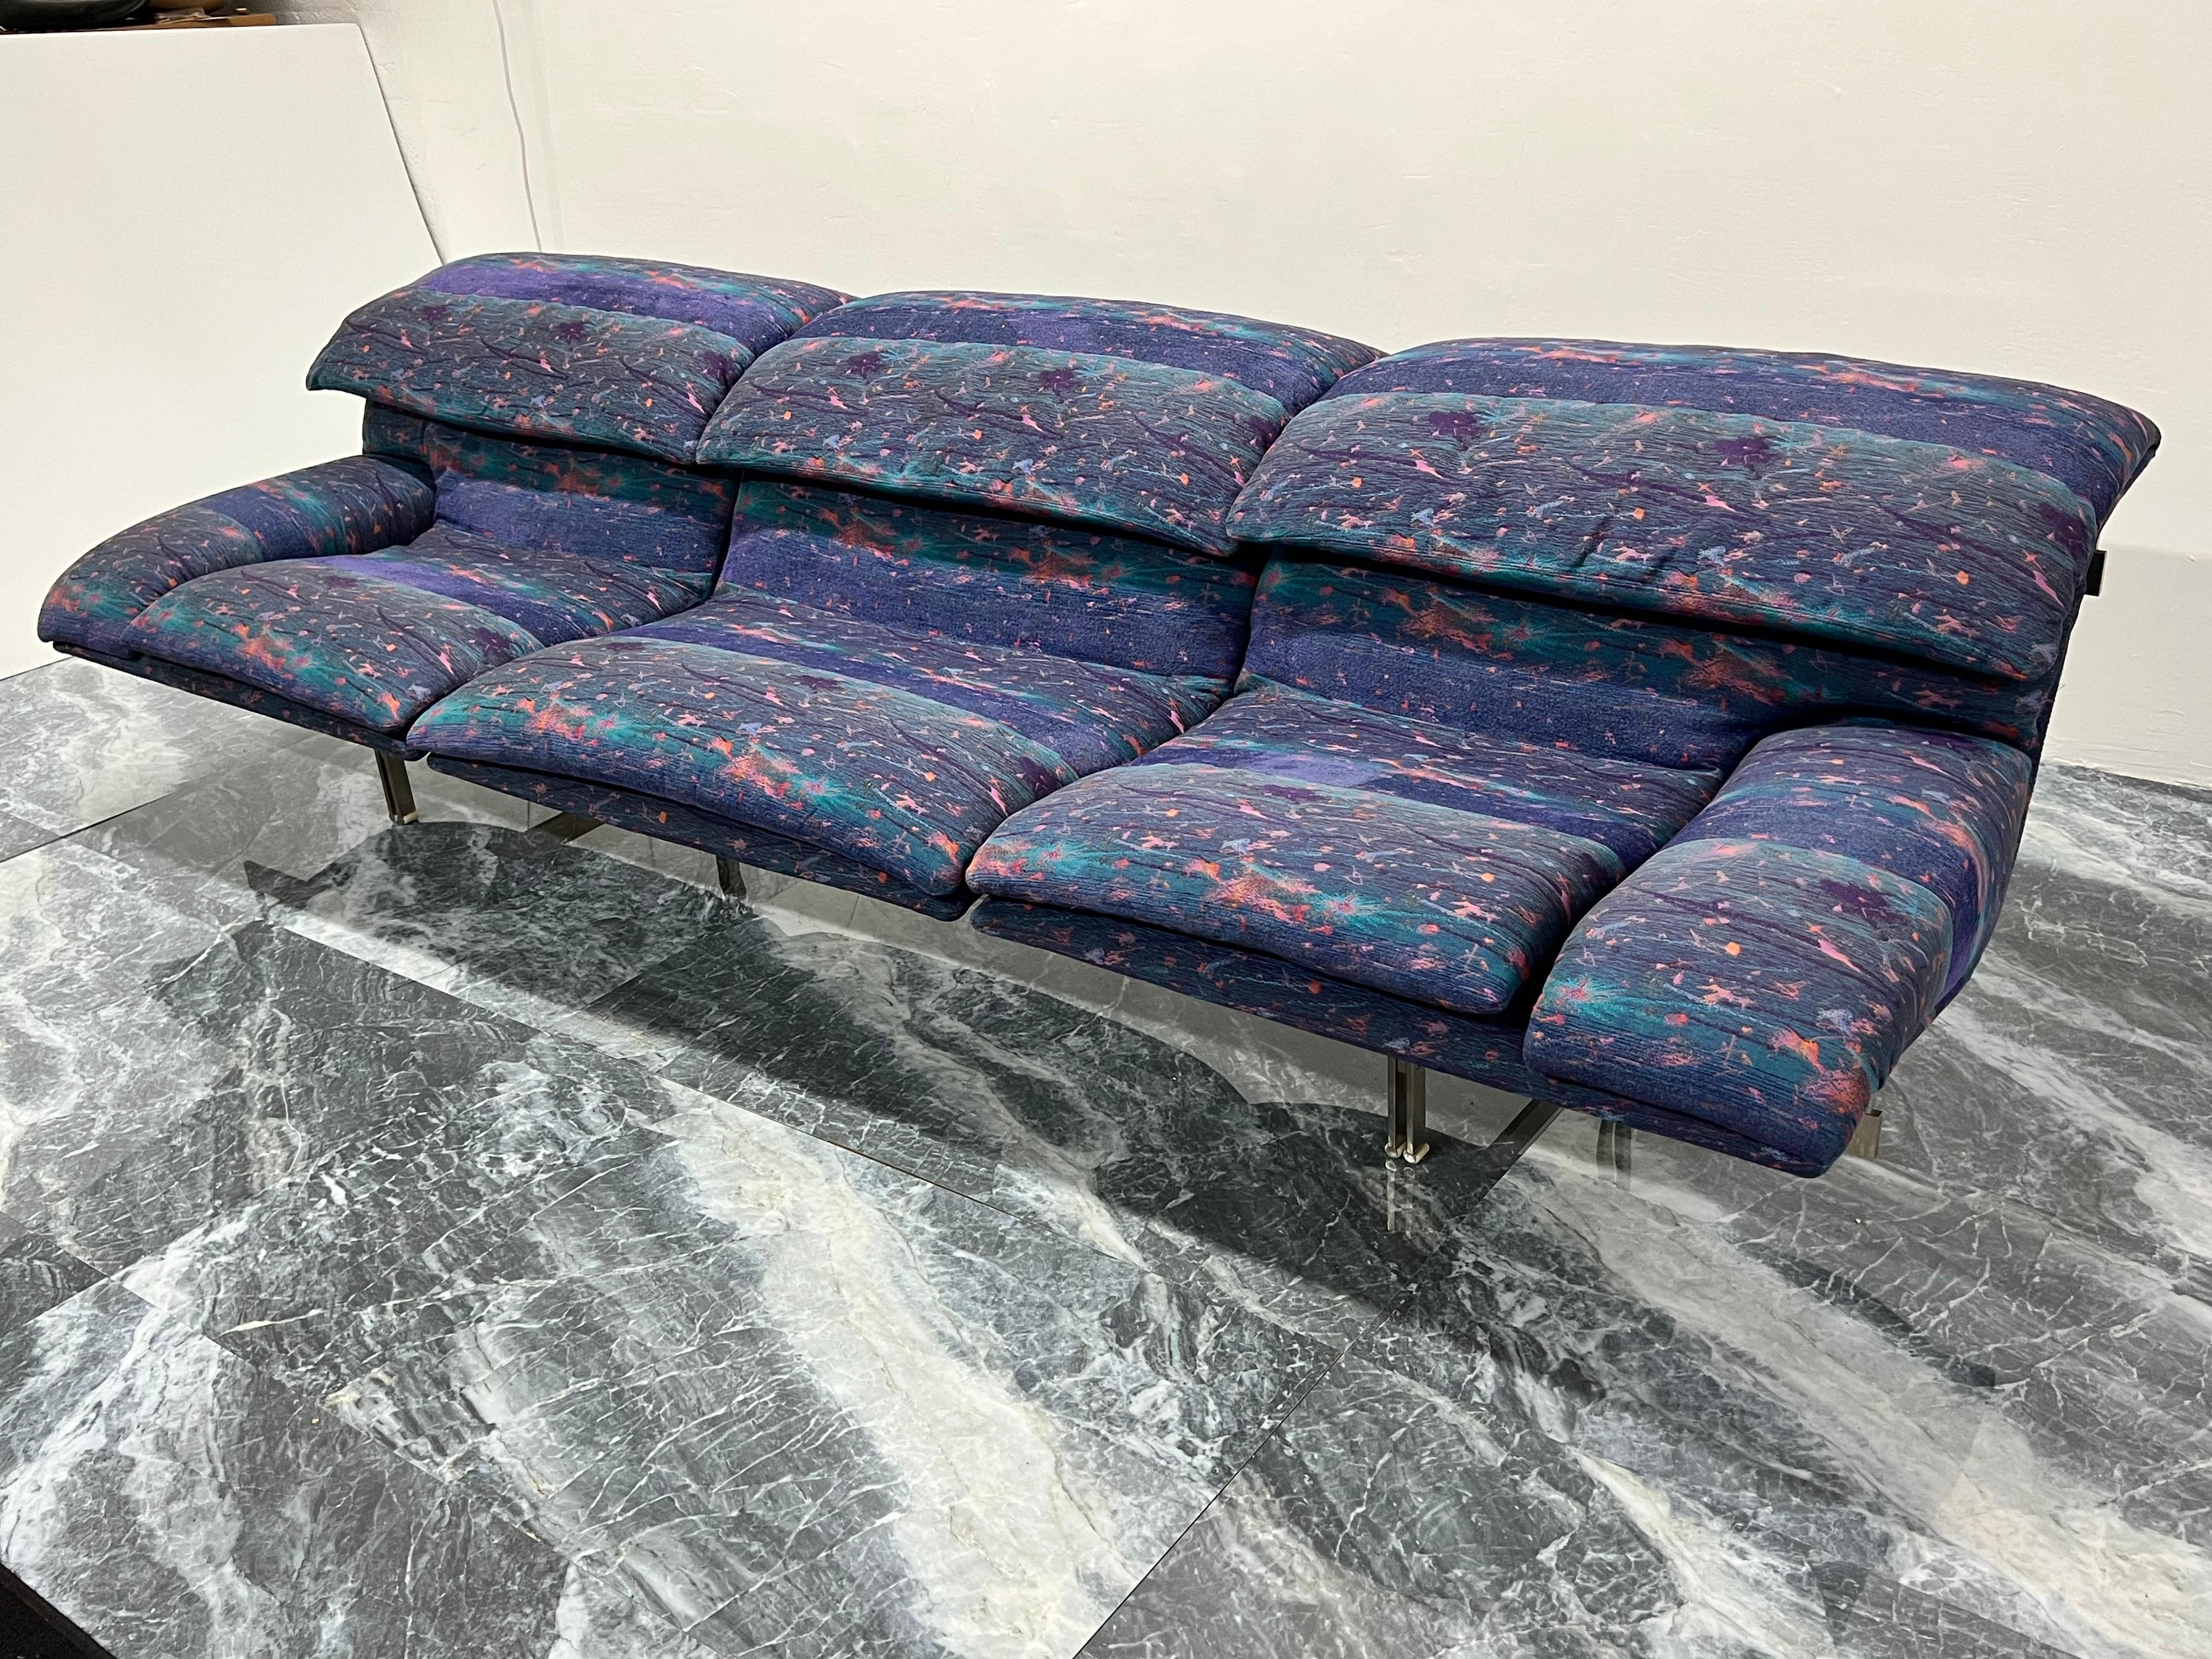 Rare three seat Onda Wave arm sofa with original Missoni fabric designed by Giovanni Offredi for Saporiti Italia. 

The polyurethane injected cushions have been professionally cleaned and the fabric maintains its rich, vibrant color. Steel blade